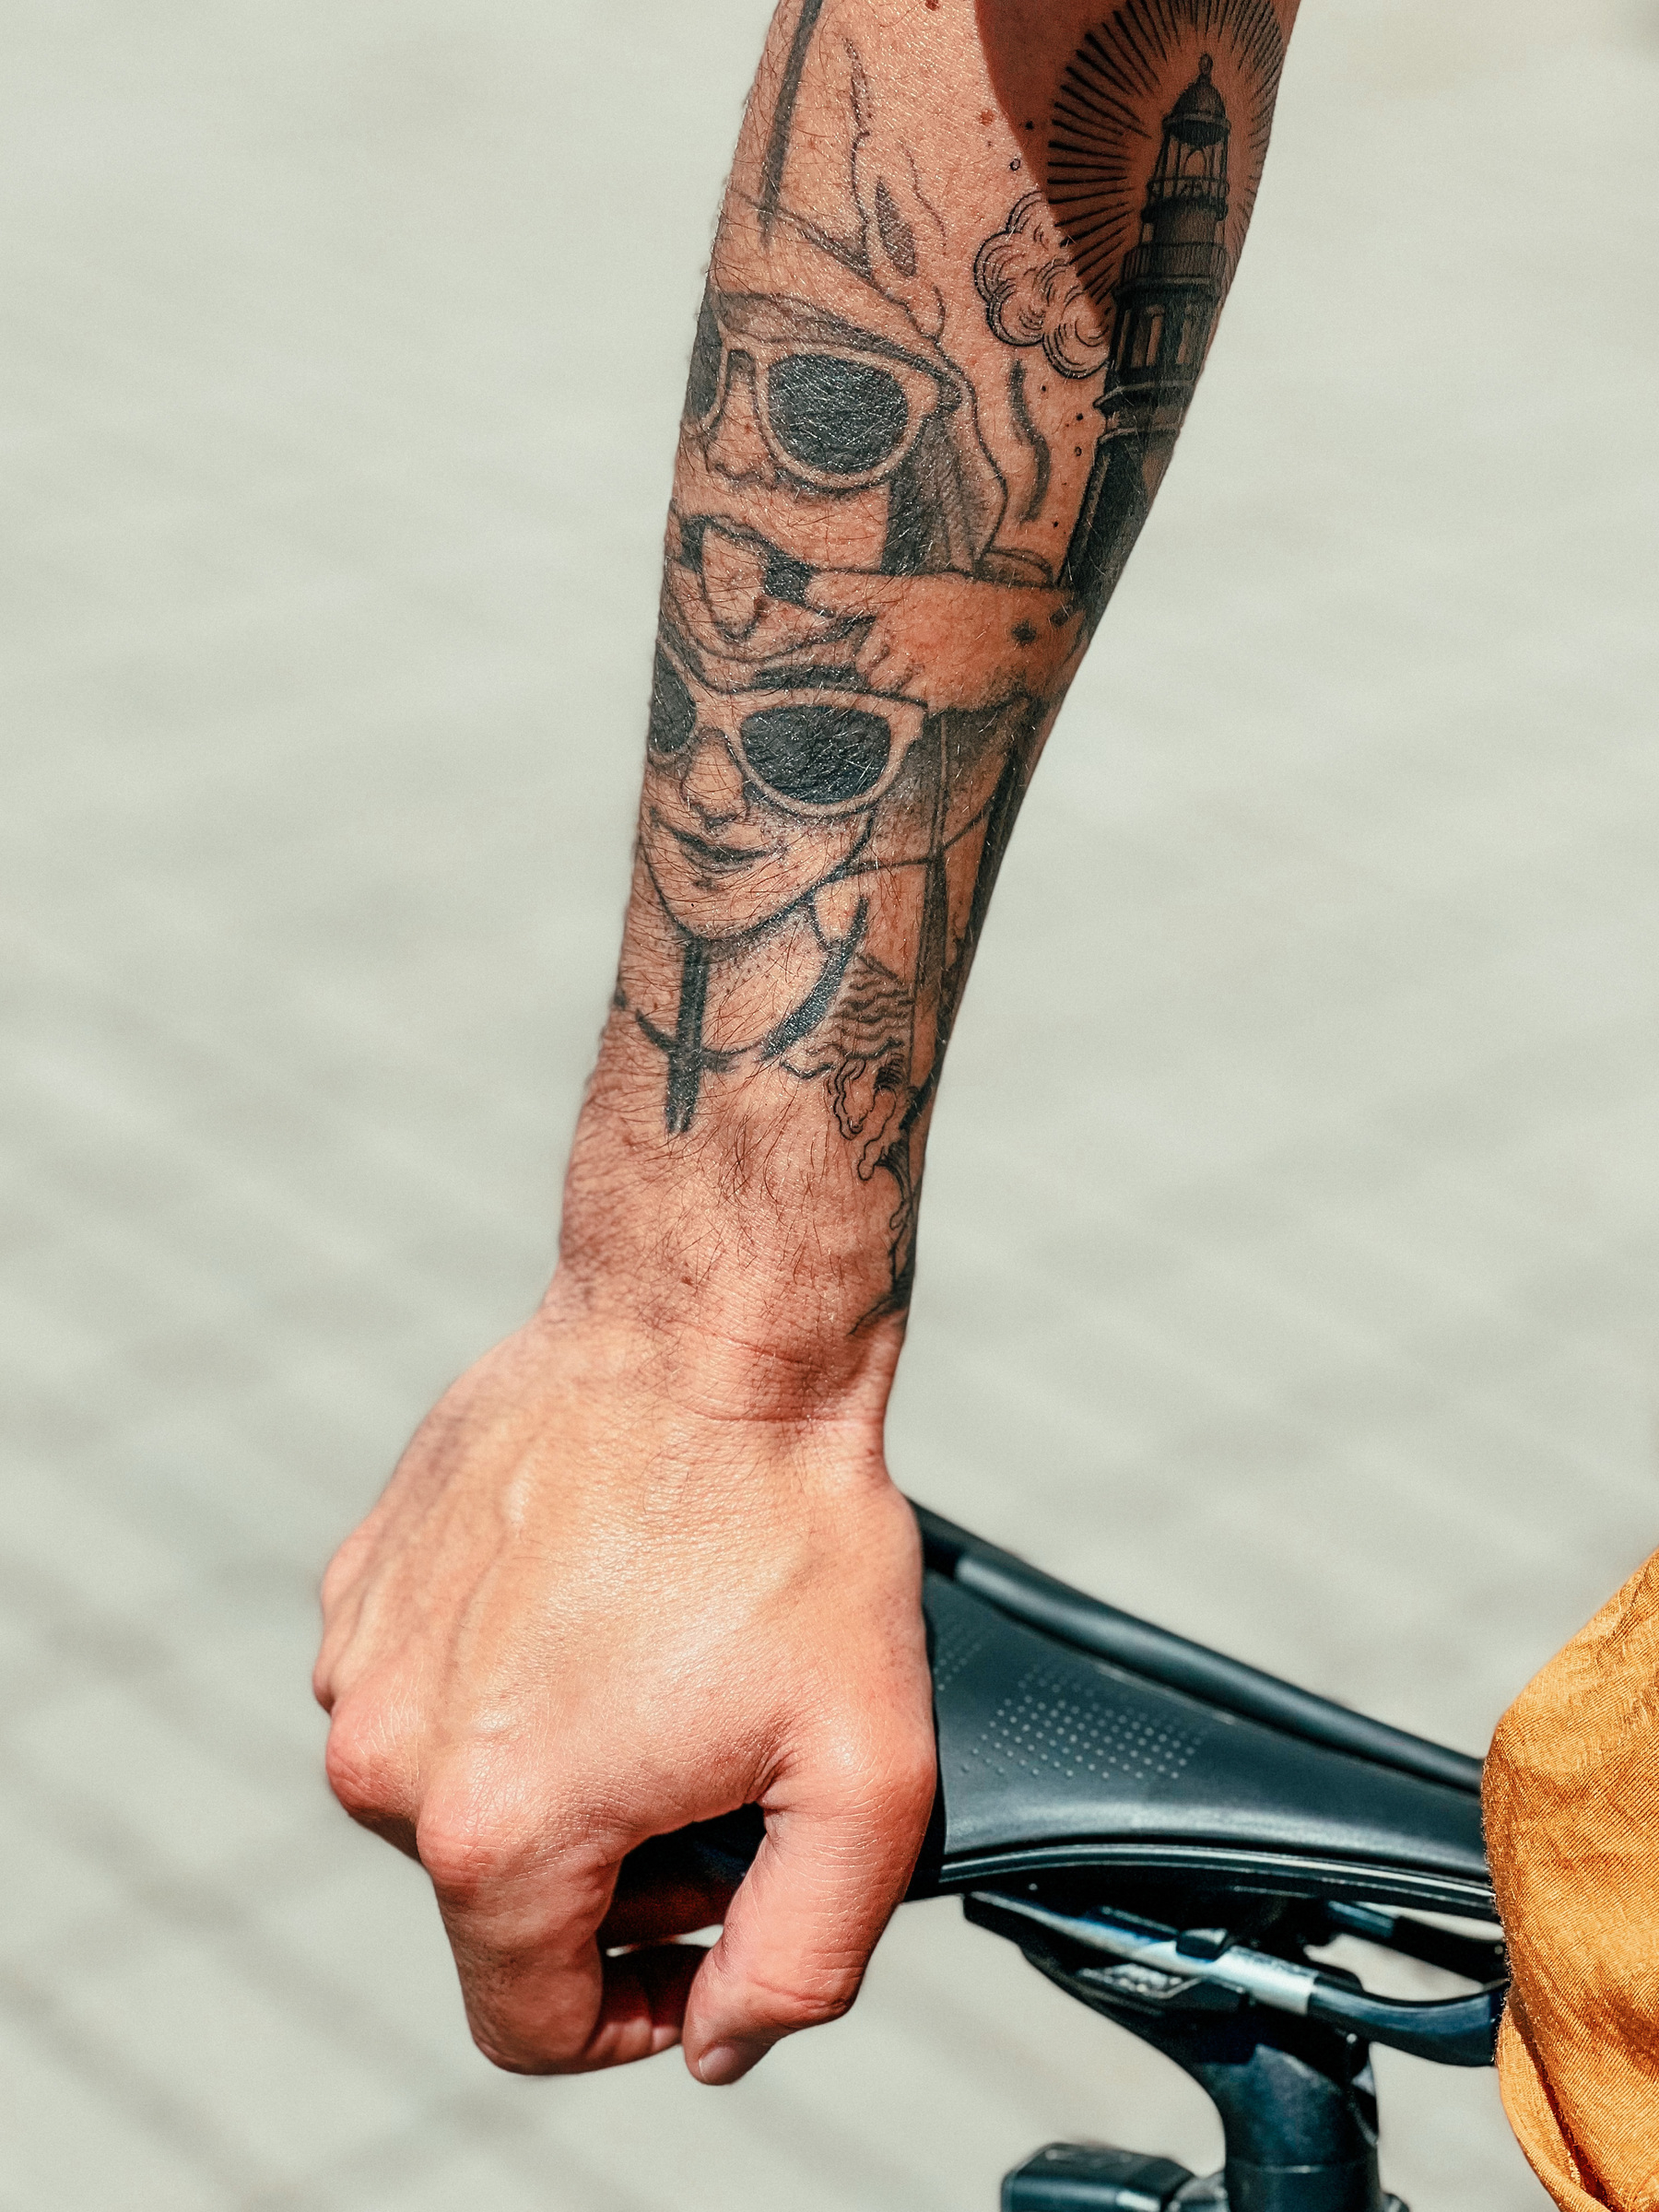 A hand rests on the seat of a bicycle. On the arm you can see a tattoo depicting two kids, and a lighthouse. 